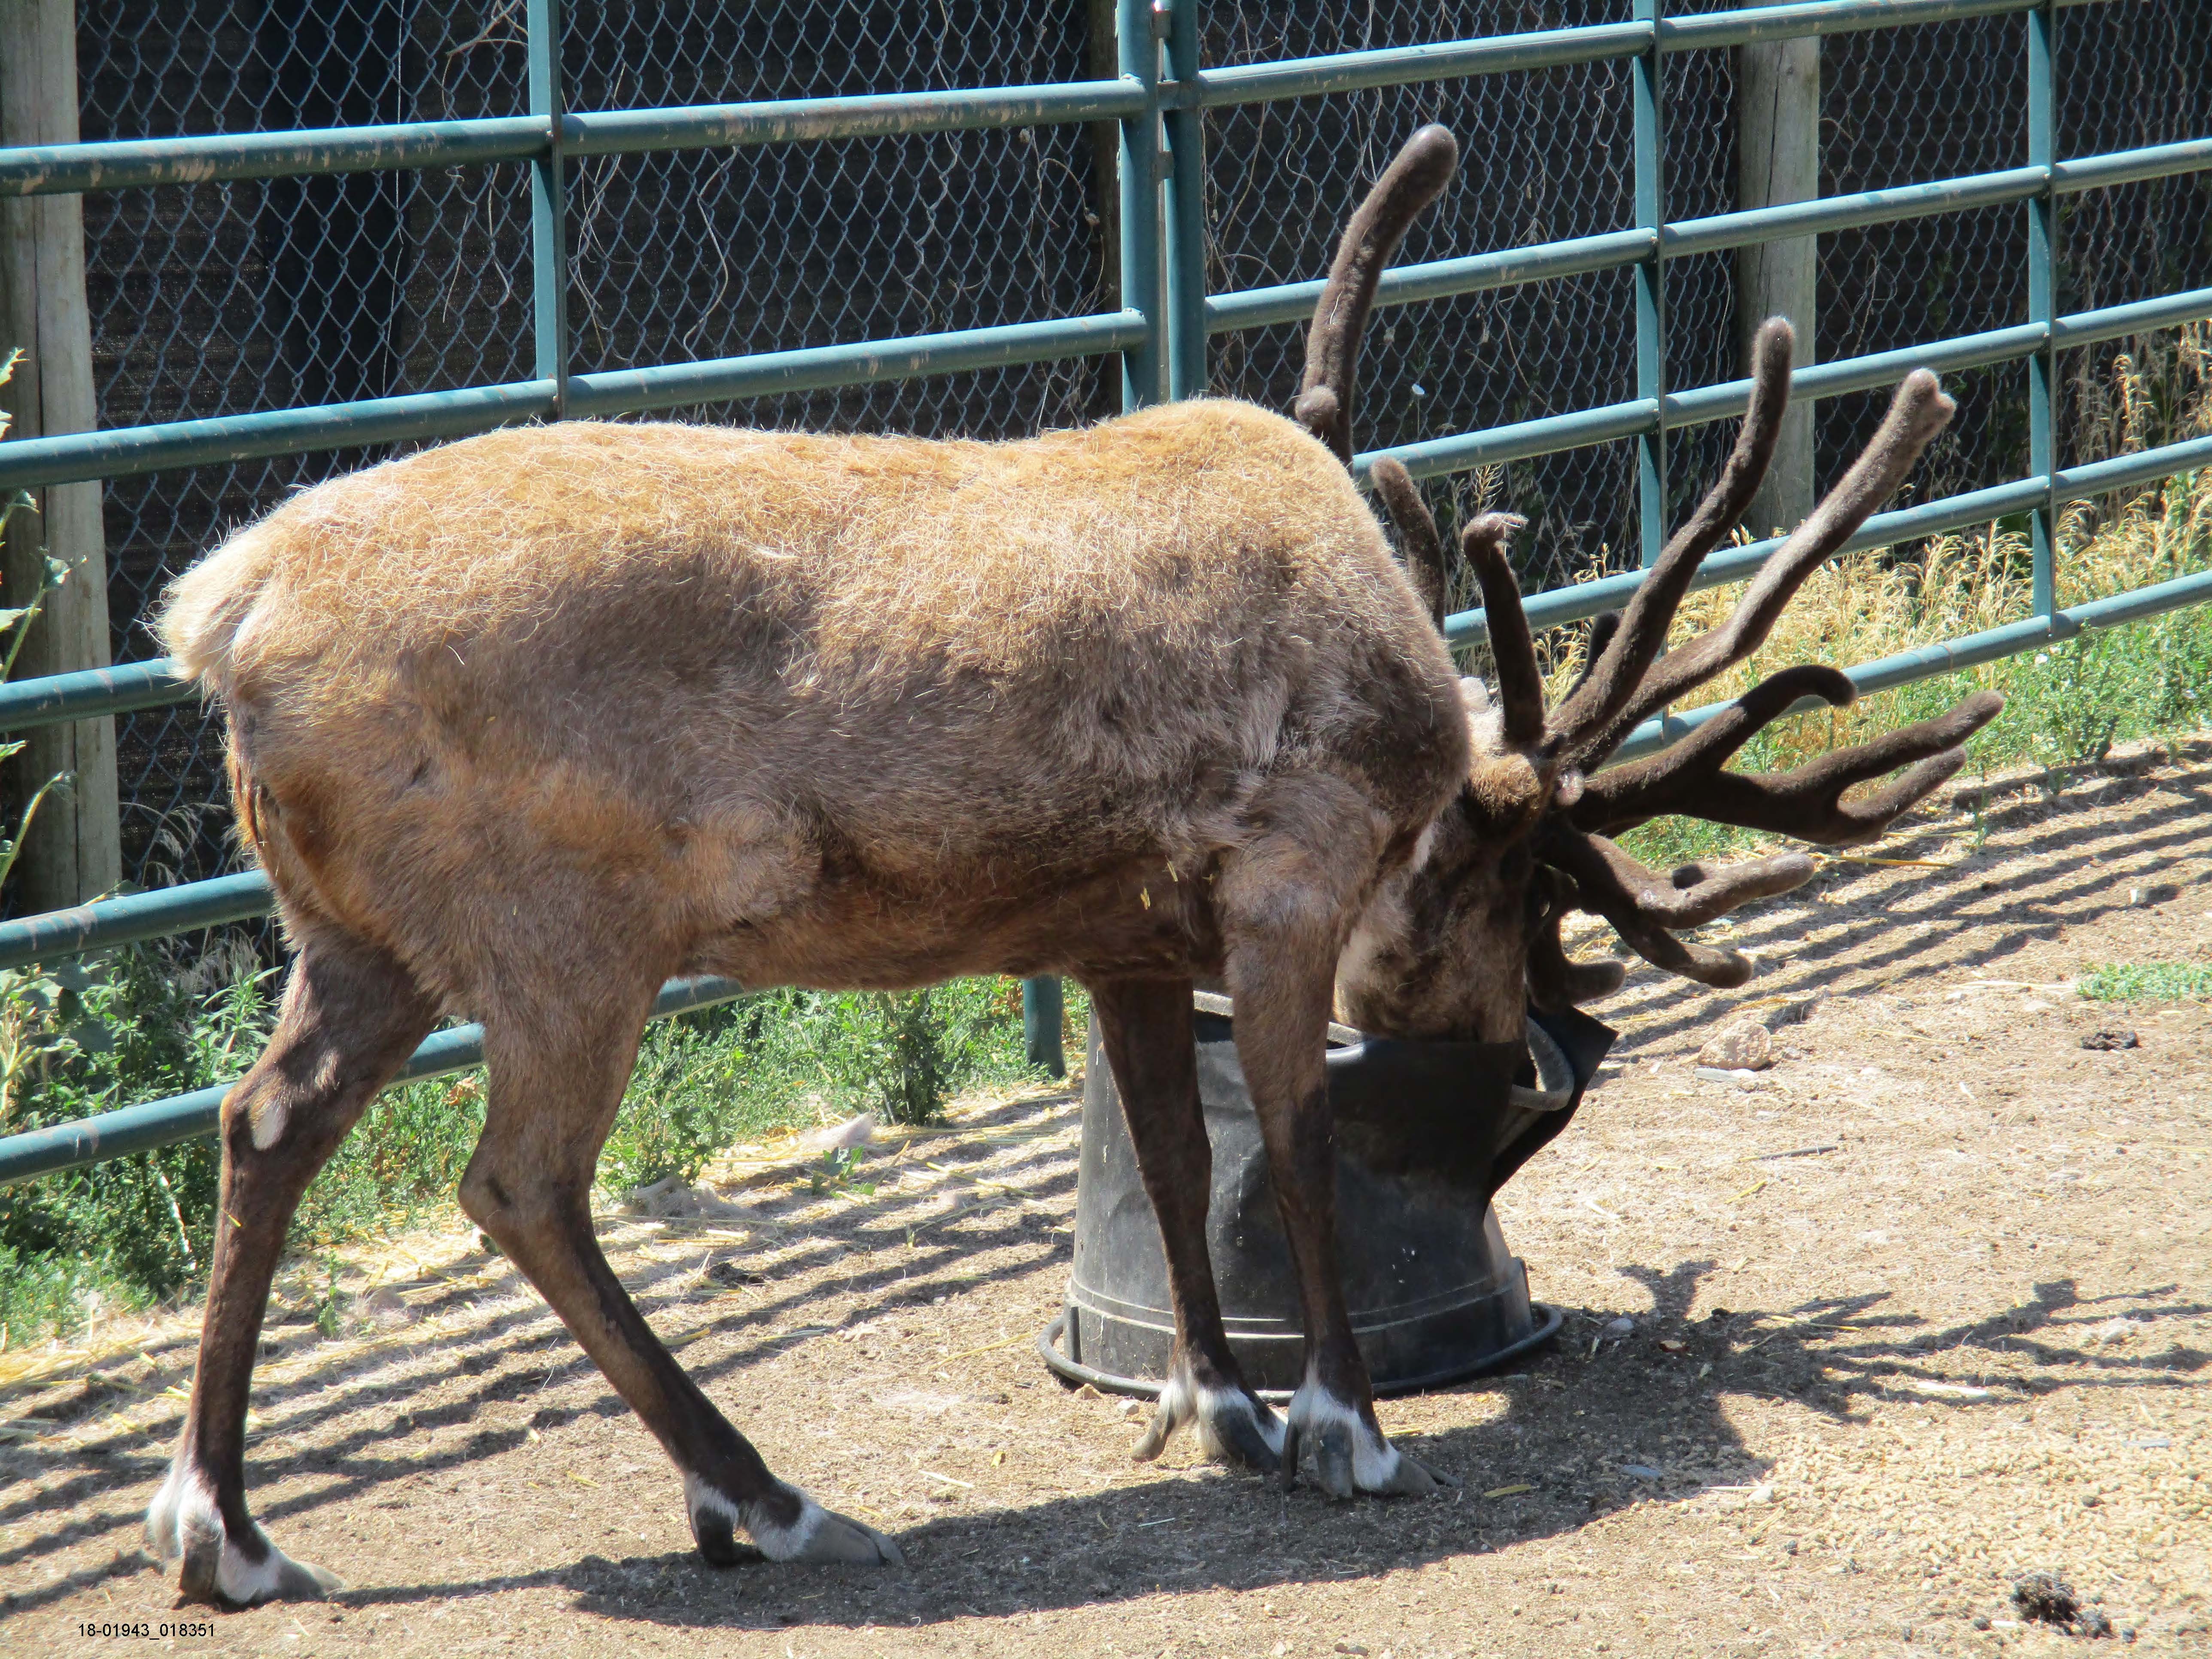 A reindeer with hooves that are too long, who may have been used for Christmas events